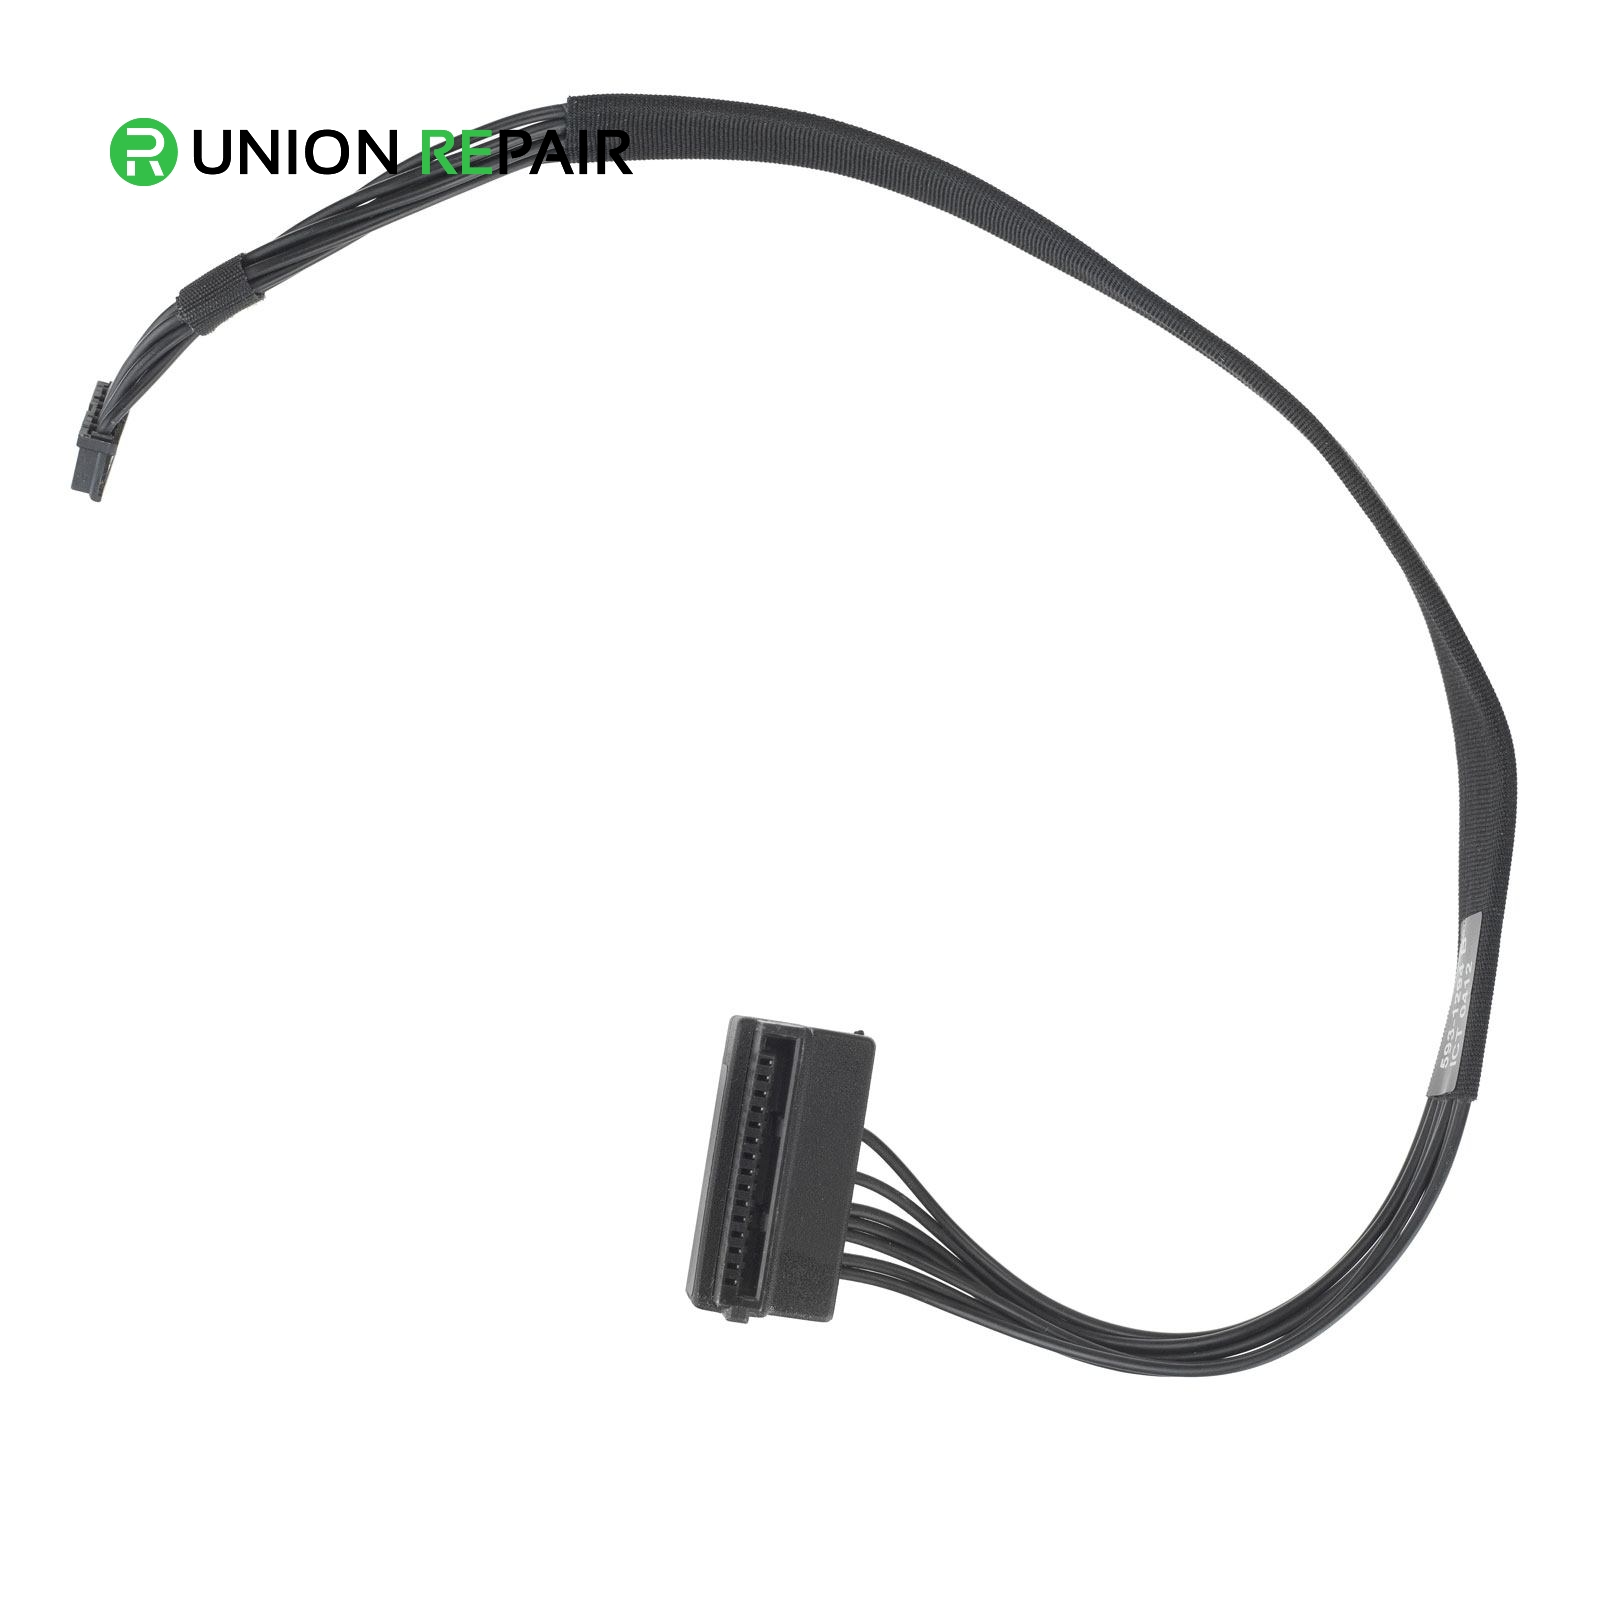 Hard Drive Power Cable for iMac 21.5" A1311 (Mid 2011 - Late 2011)